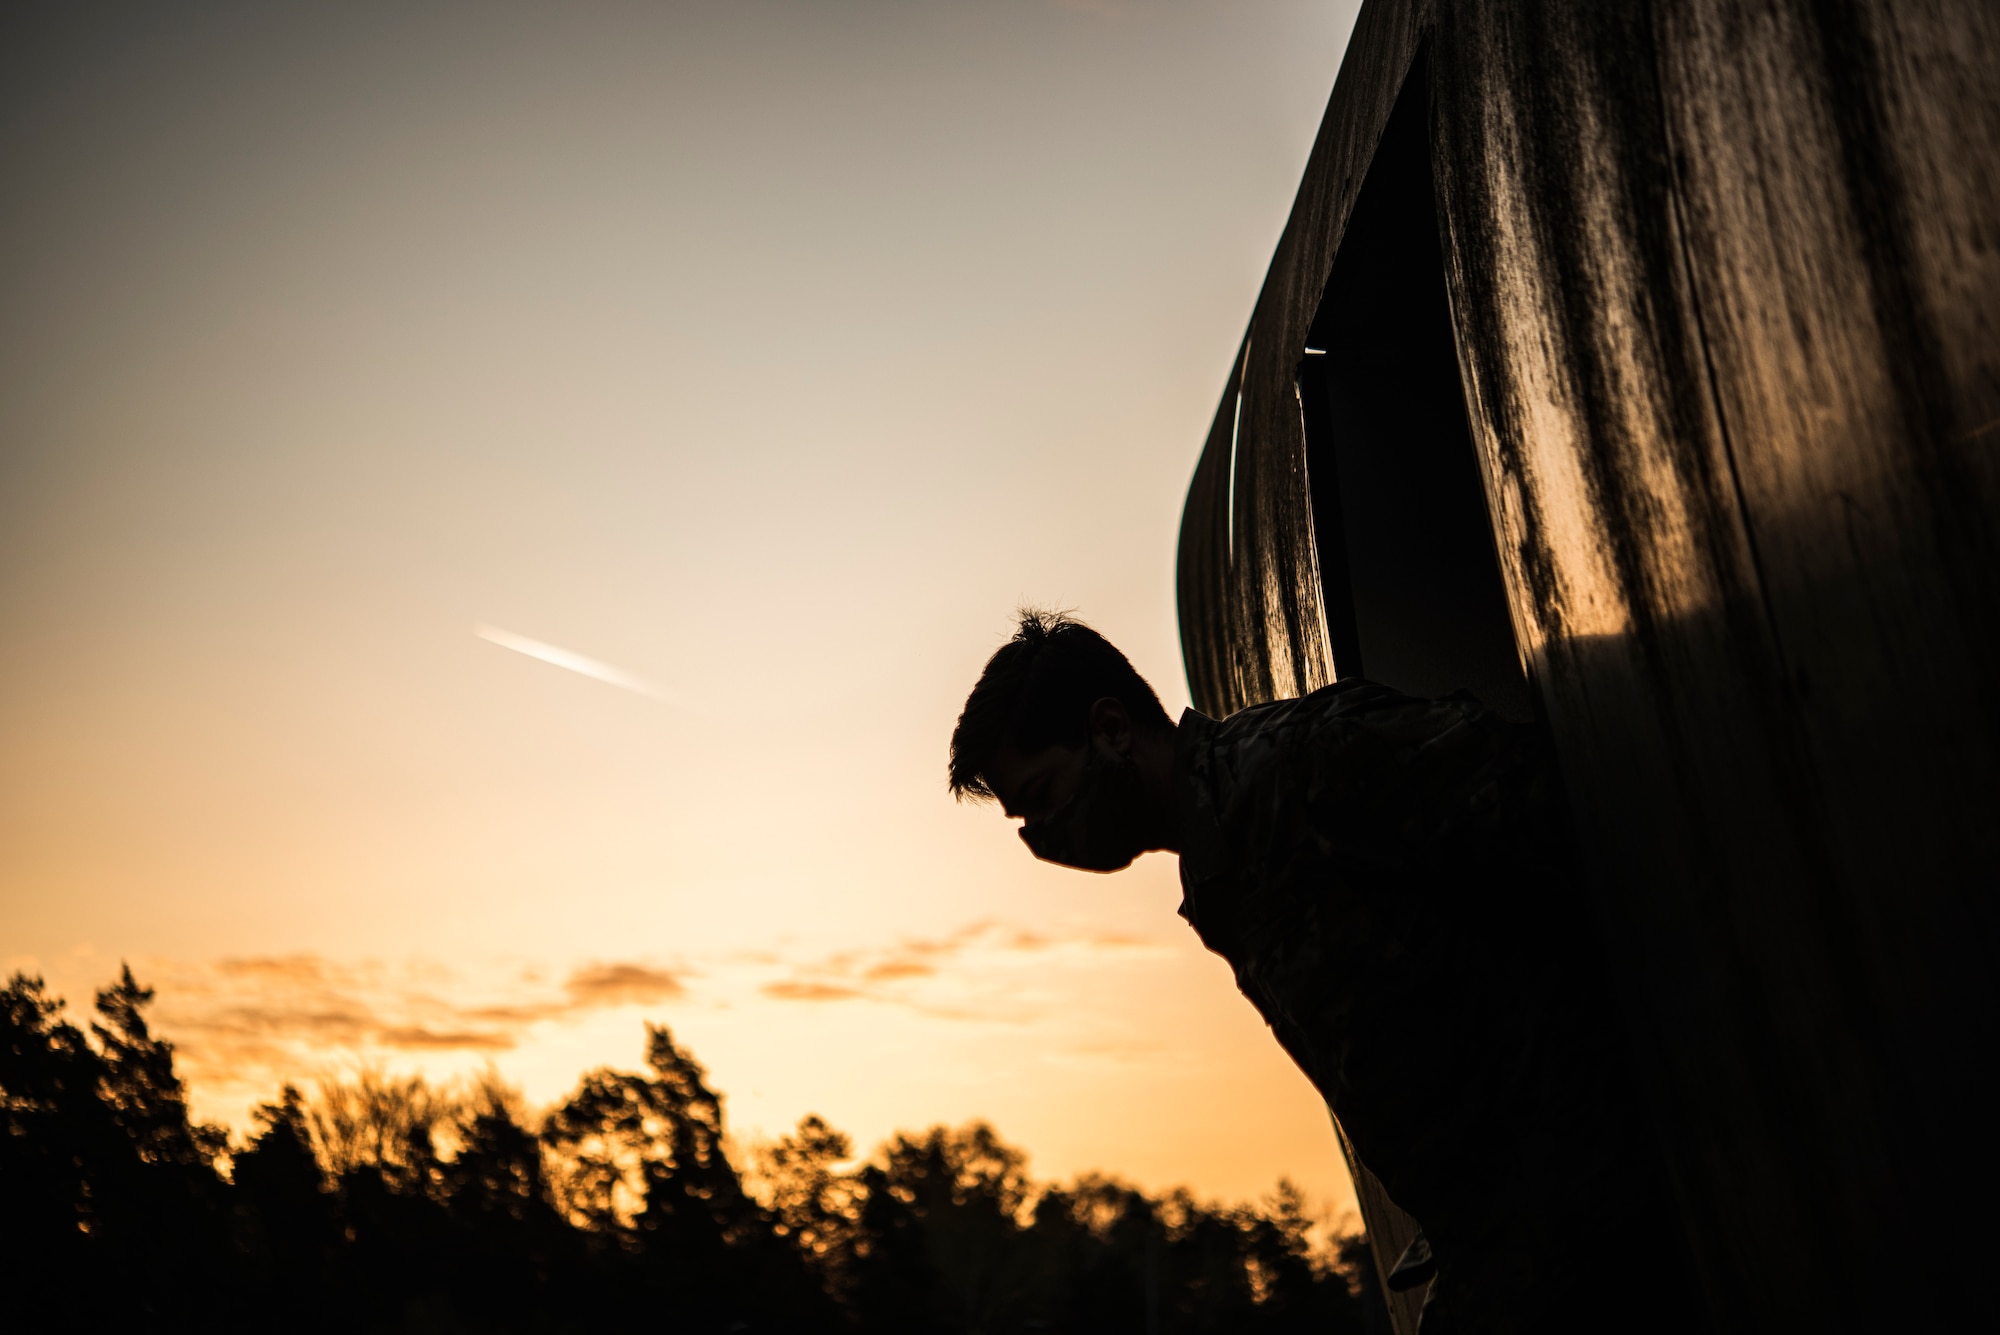 An Airman is silhouetted looking out from a C-130 training model during sunrise.